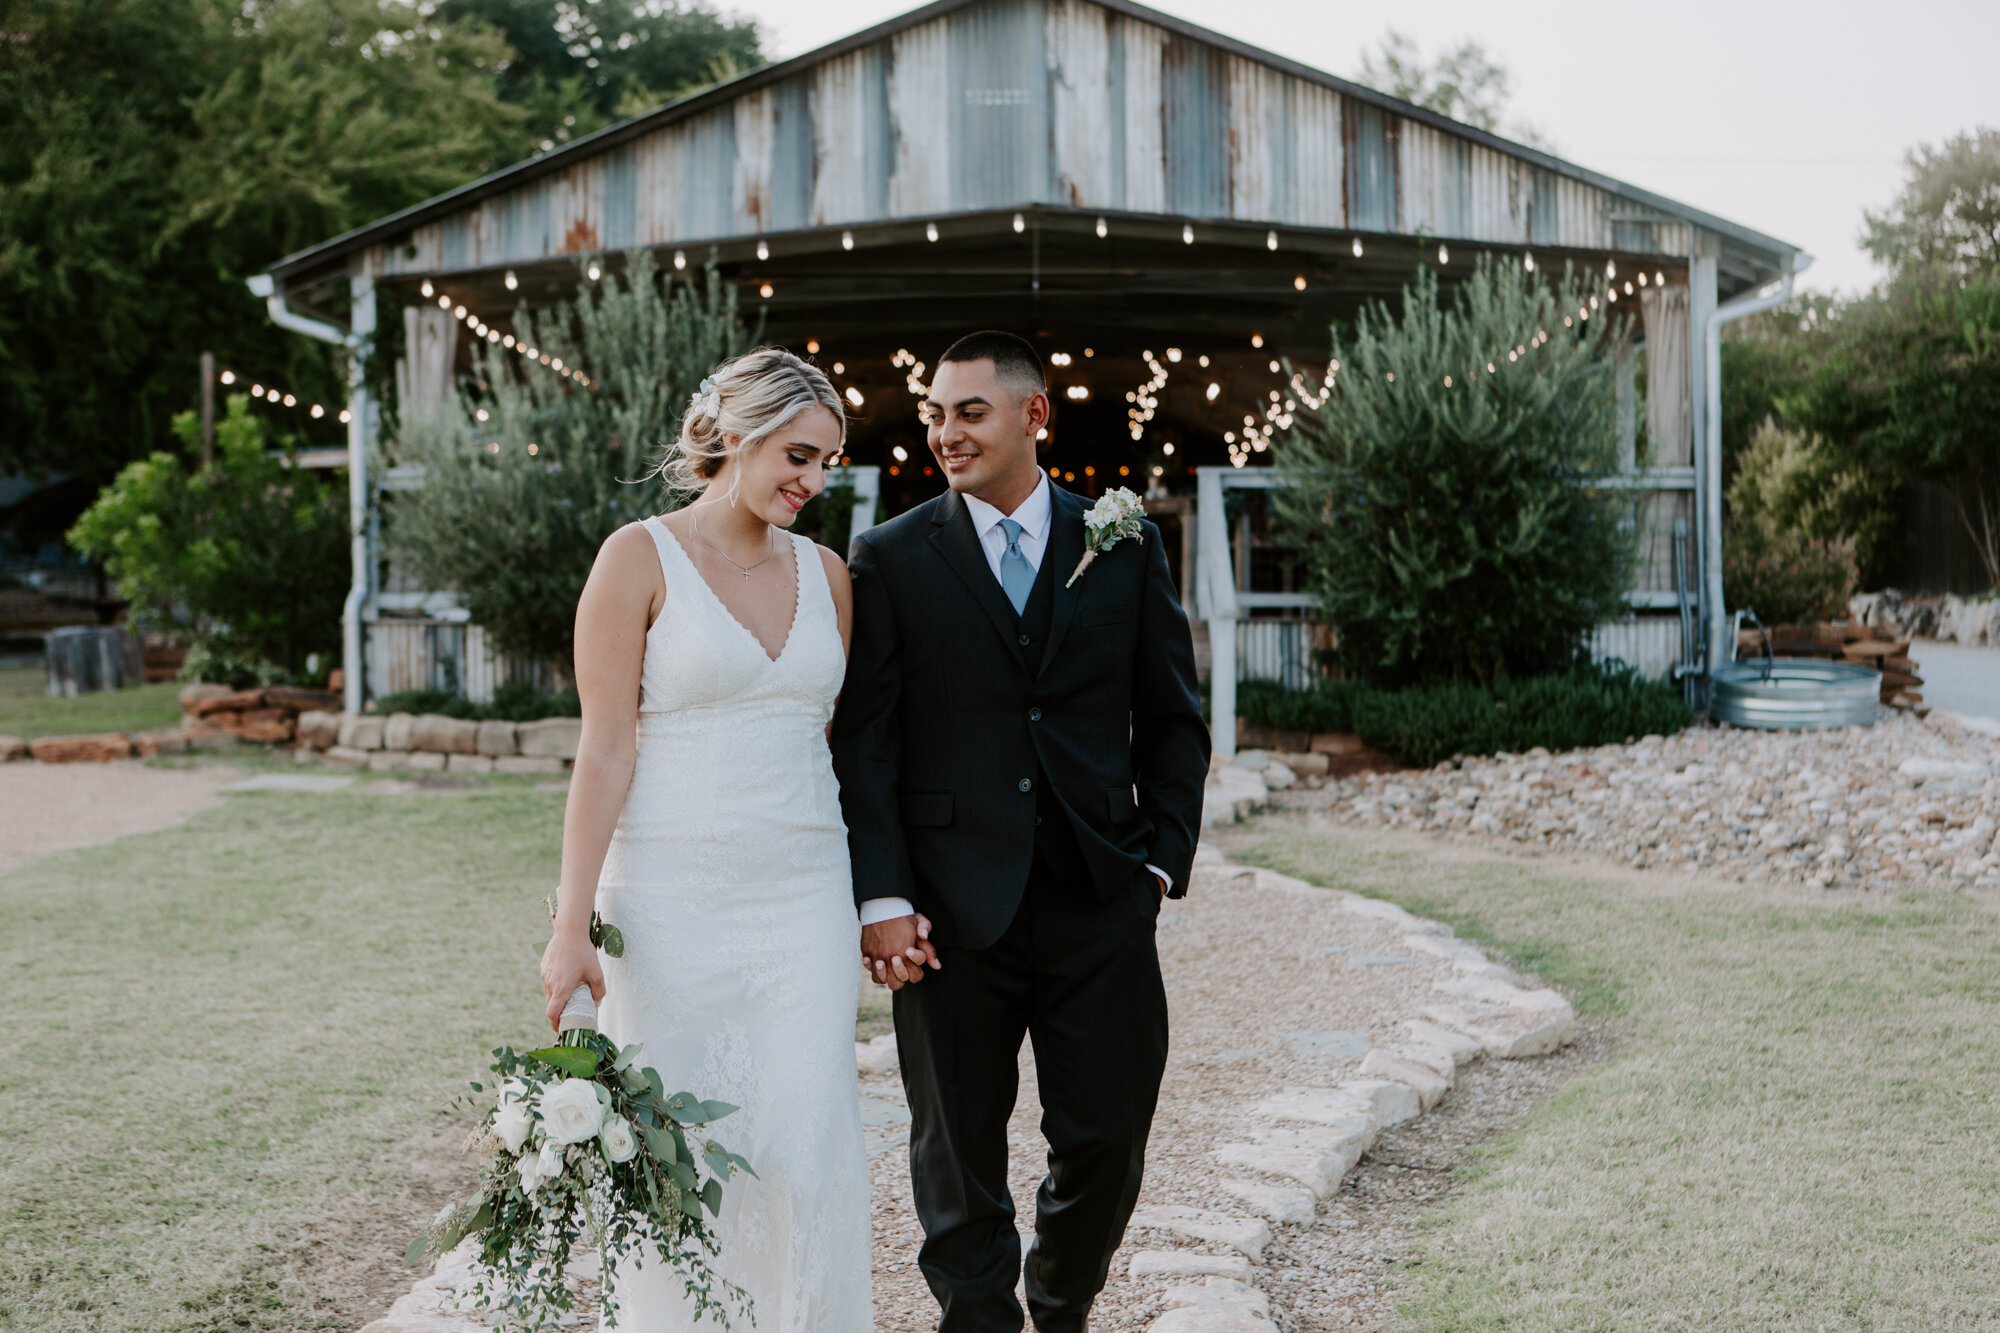 Bride and groom photo of the day. Radiant Bohemian Hill Country Wedding at Gruene Estate in New Braunfels, TX